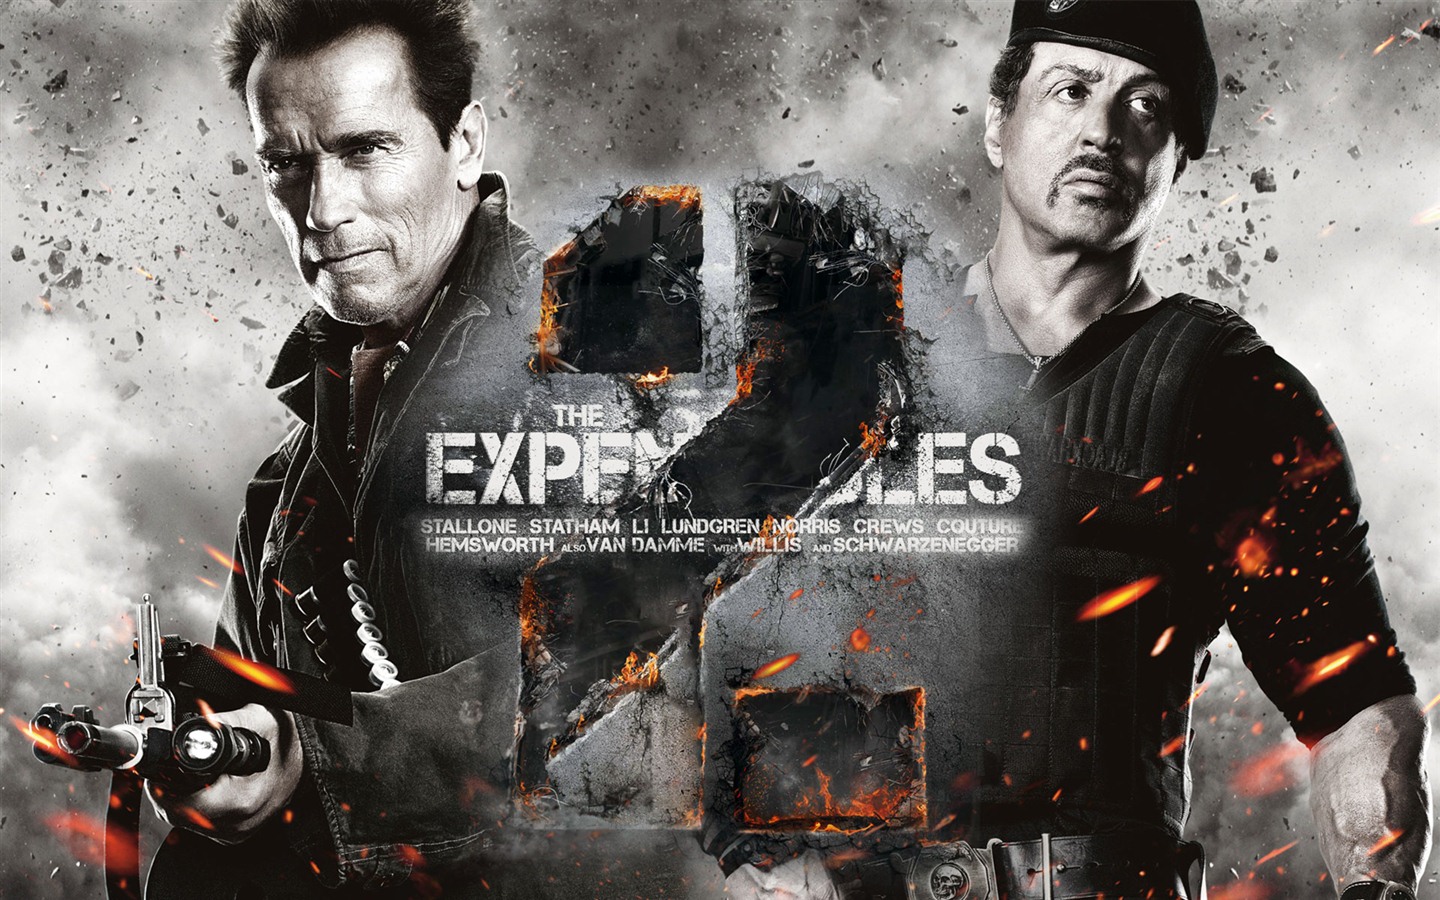 2012 The Expendables 2 HD Wallpaper #1 - 1440x900